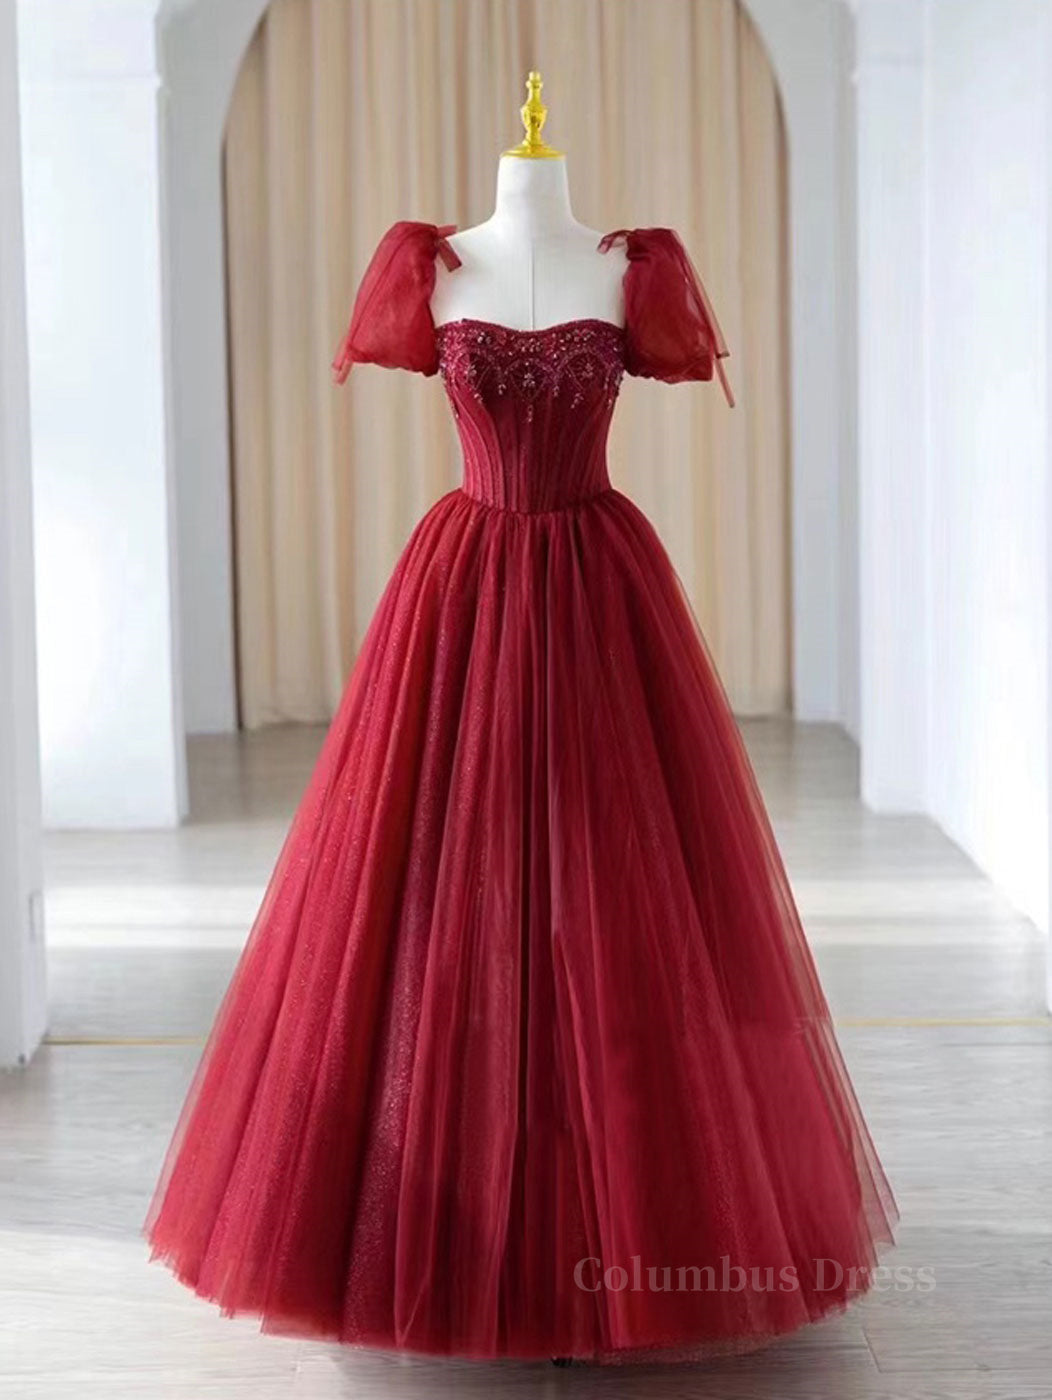 Prom Dresses 04, Burgundy A line tulle beads long prom dress burgundy formal dress